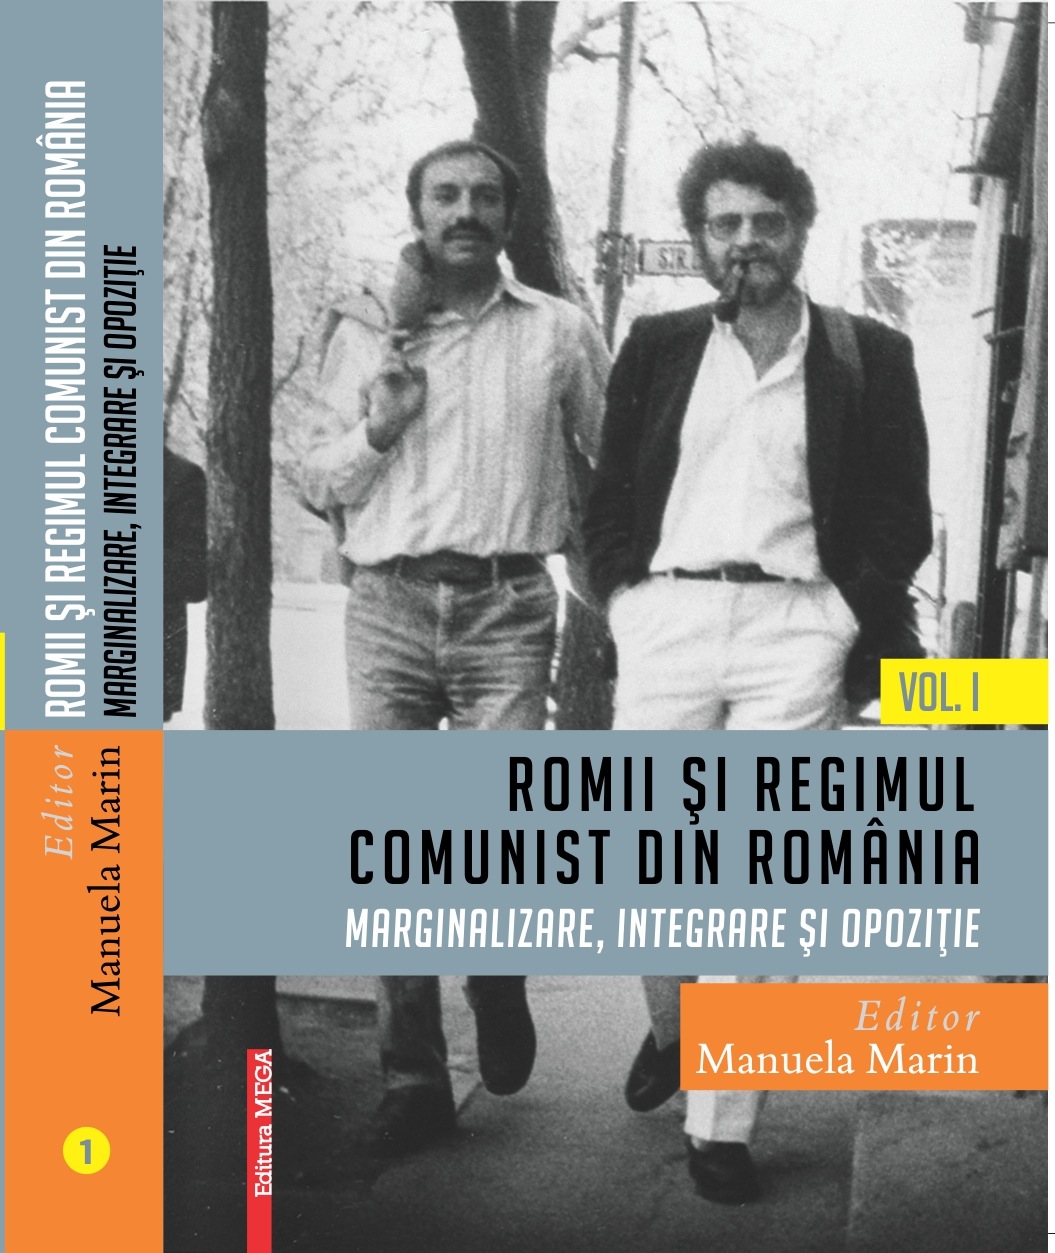 Front cover of the book: Roma and the communist regime in Romania: Marginalization, integration and opposition edited by Manuela Marin